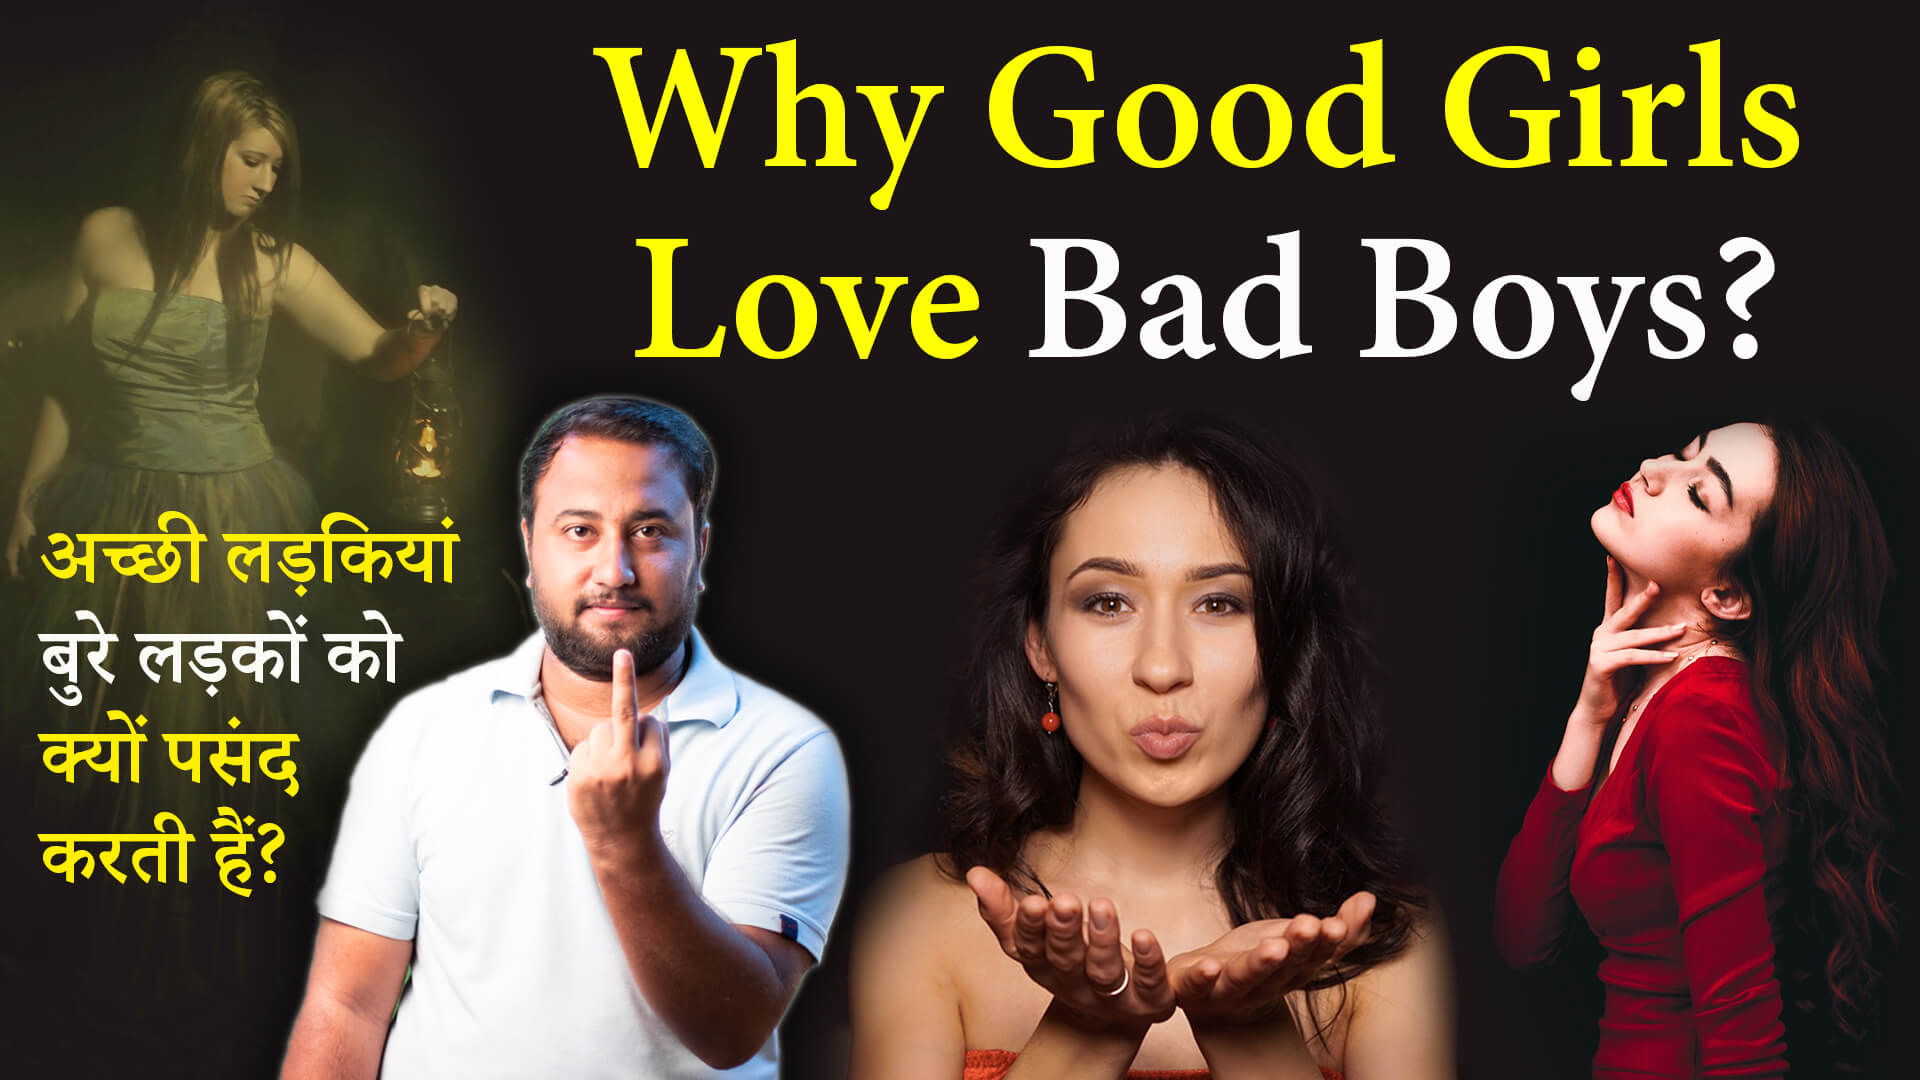 You are currently viewing Why Do Good Girls Love Bad Boys? Understand the Women’s Psychology in Hindi